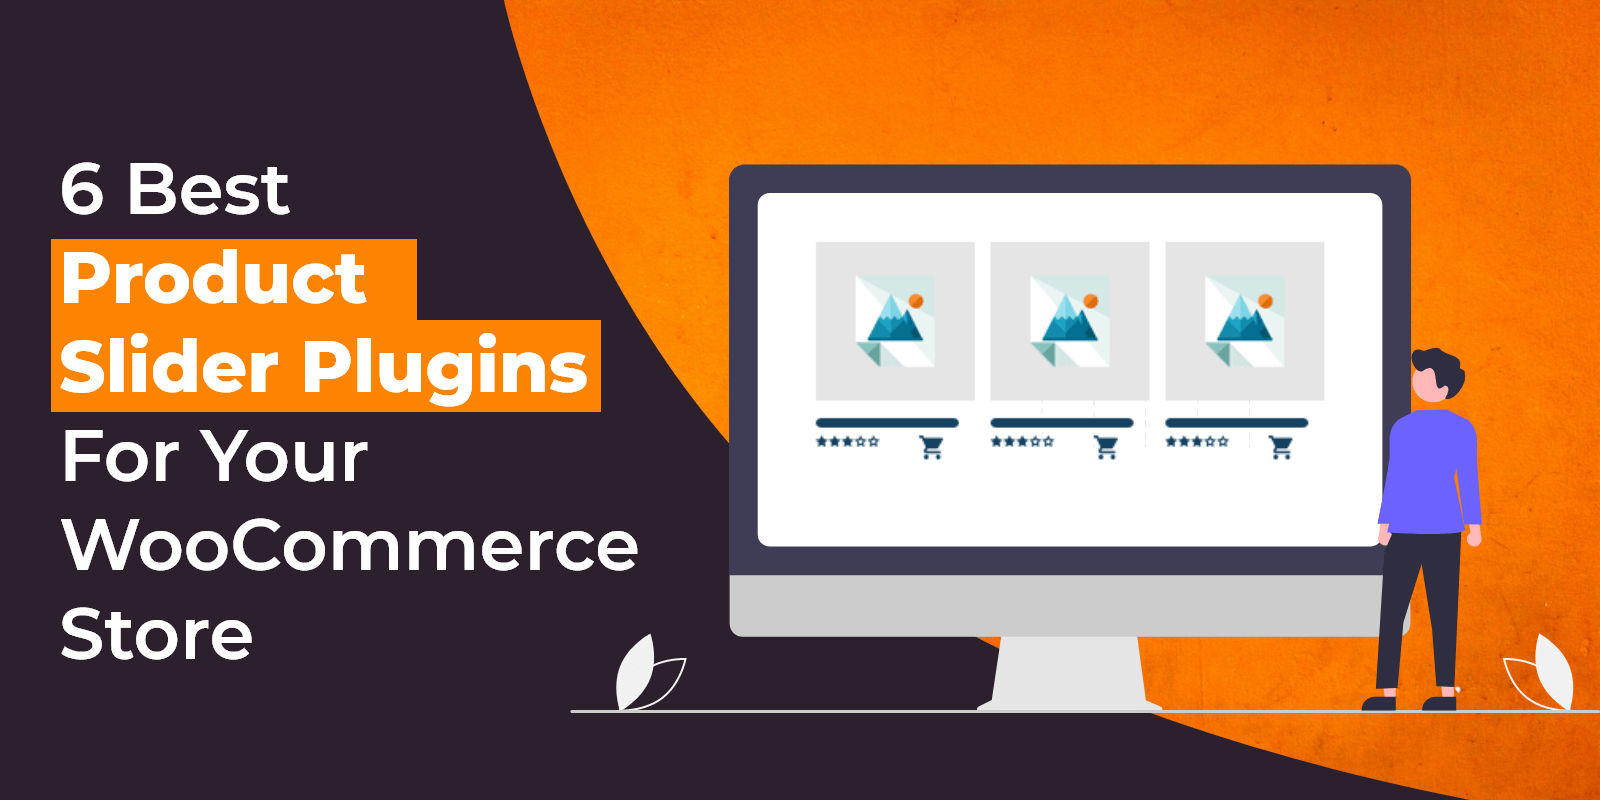 6 Best Product Slider Plugins For Your WooCommerce Store